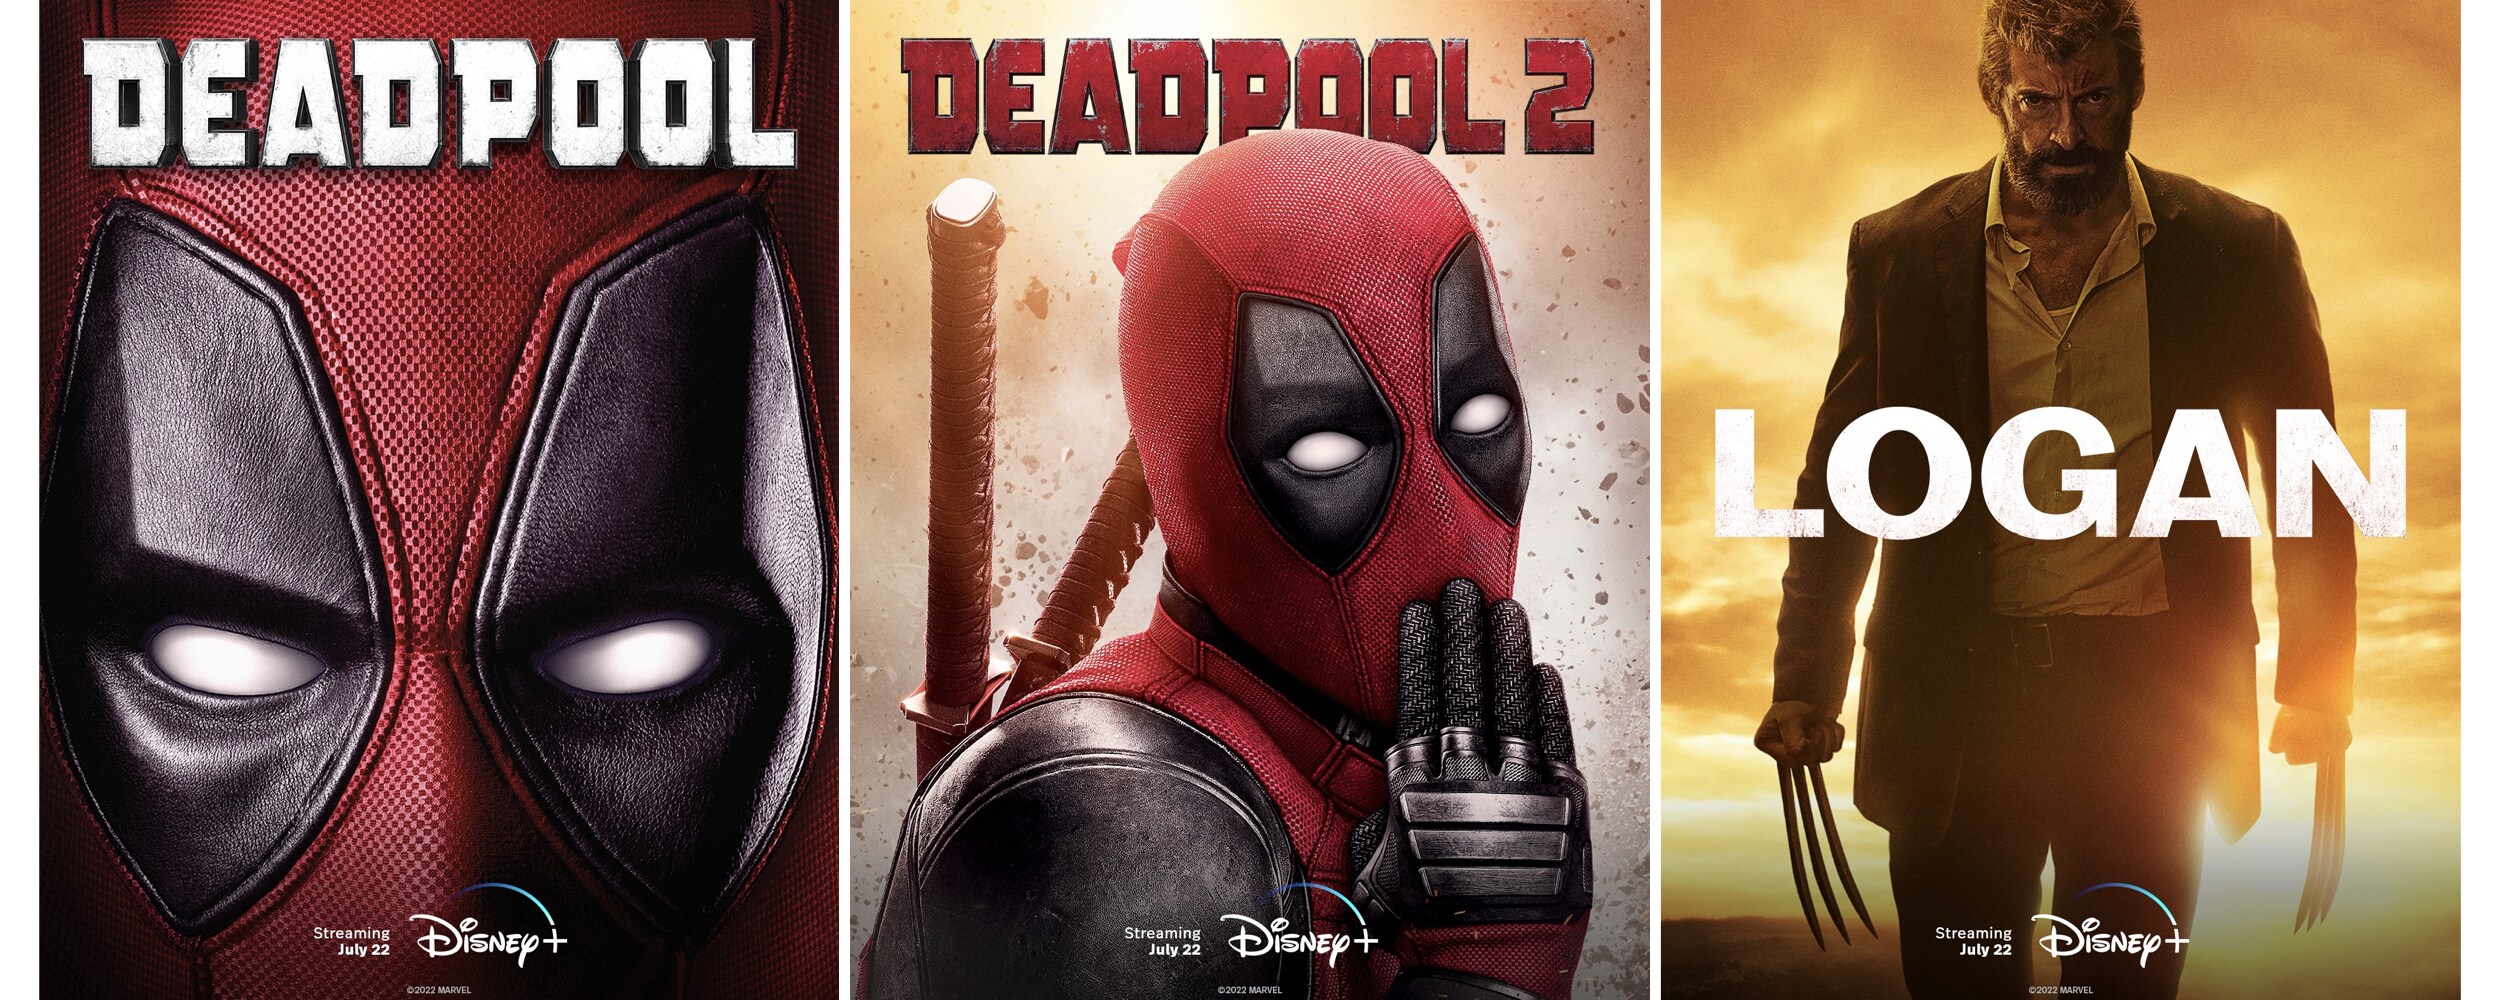 Deadpool And Logan To Join The Marvel Collection On Disney+